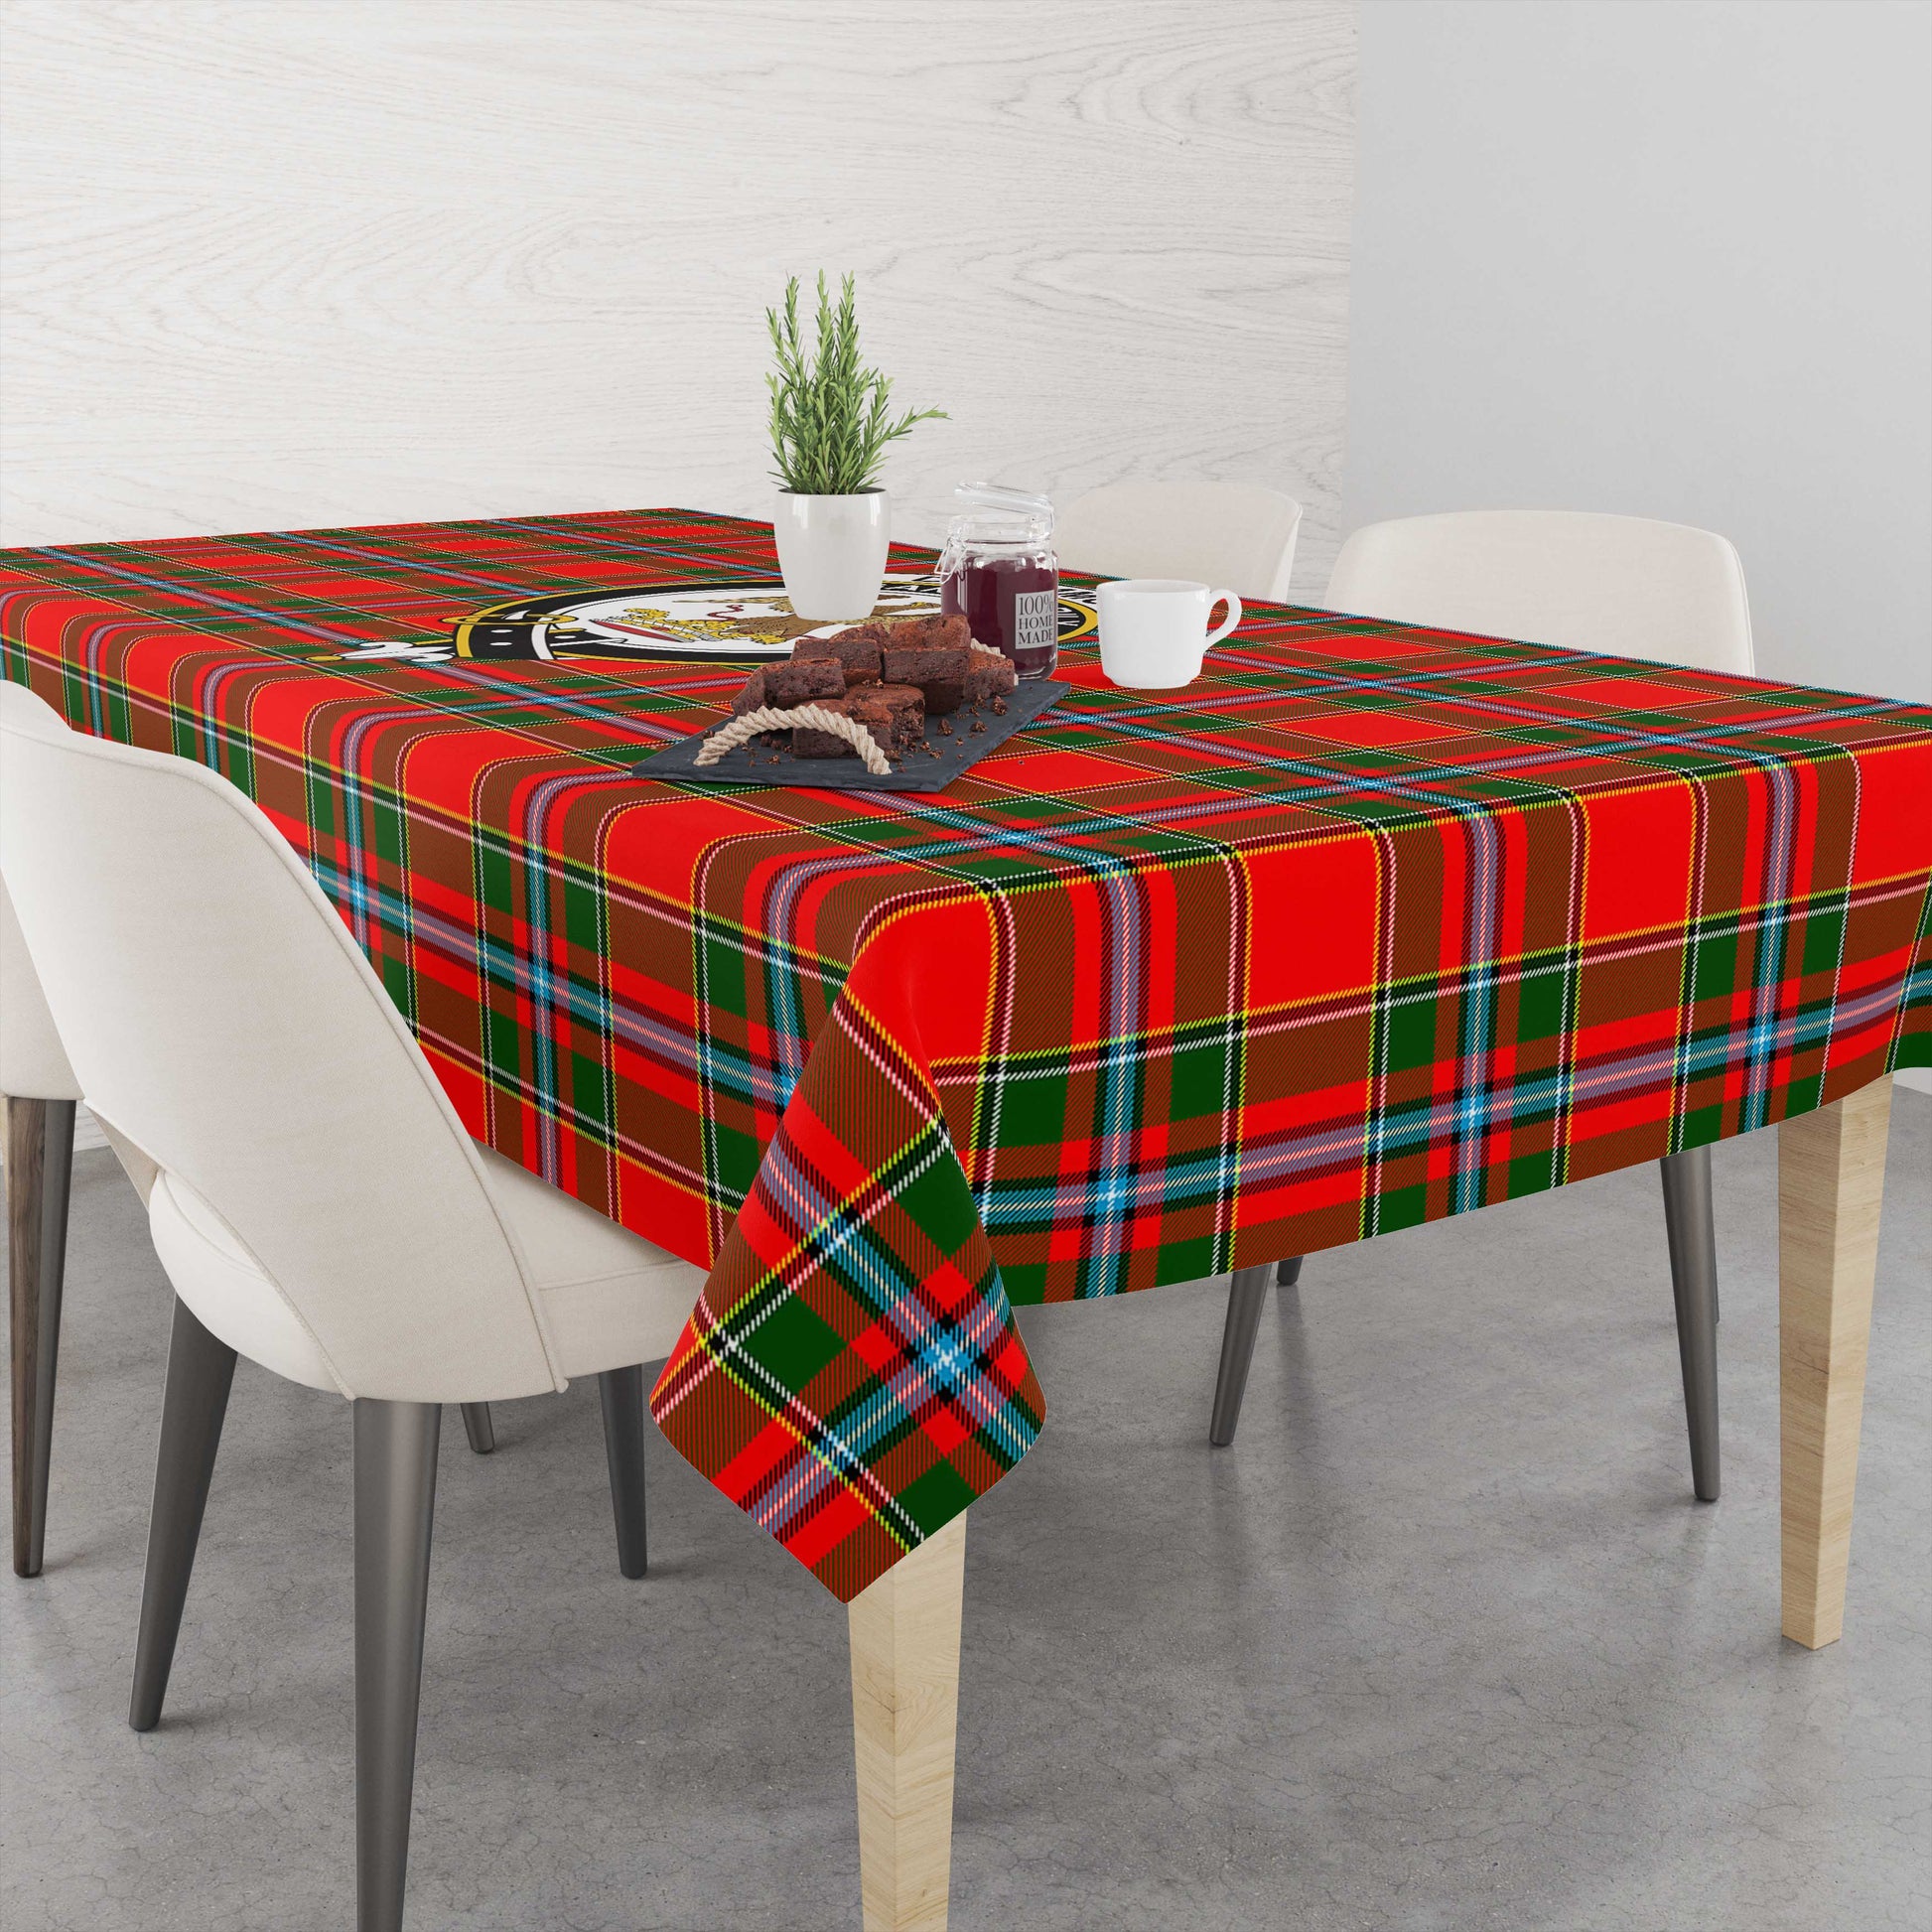 drummond-of-perth-tatan-tablecloth-with-family-crest